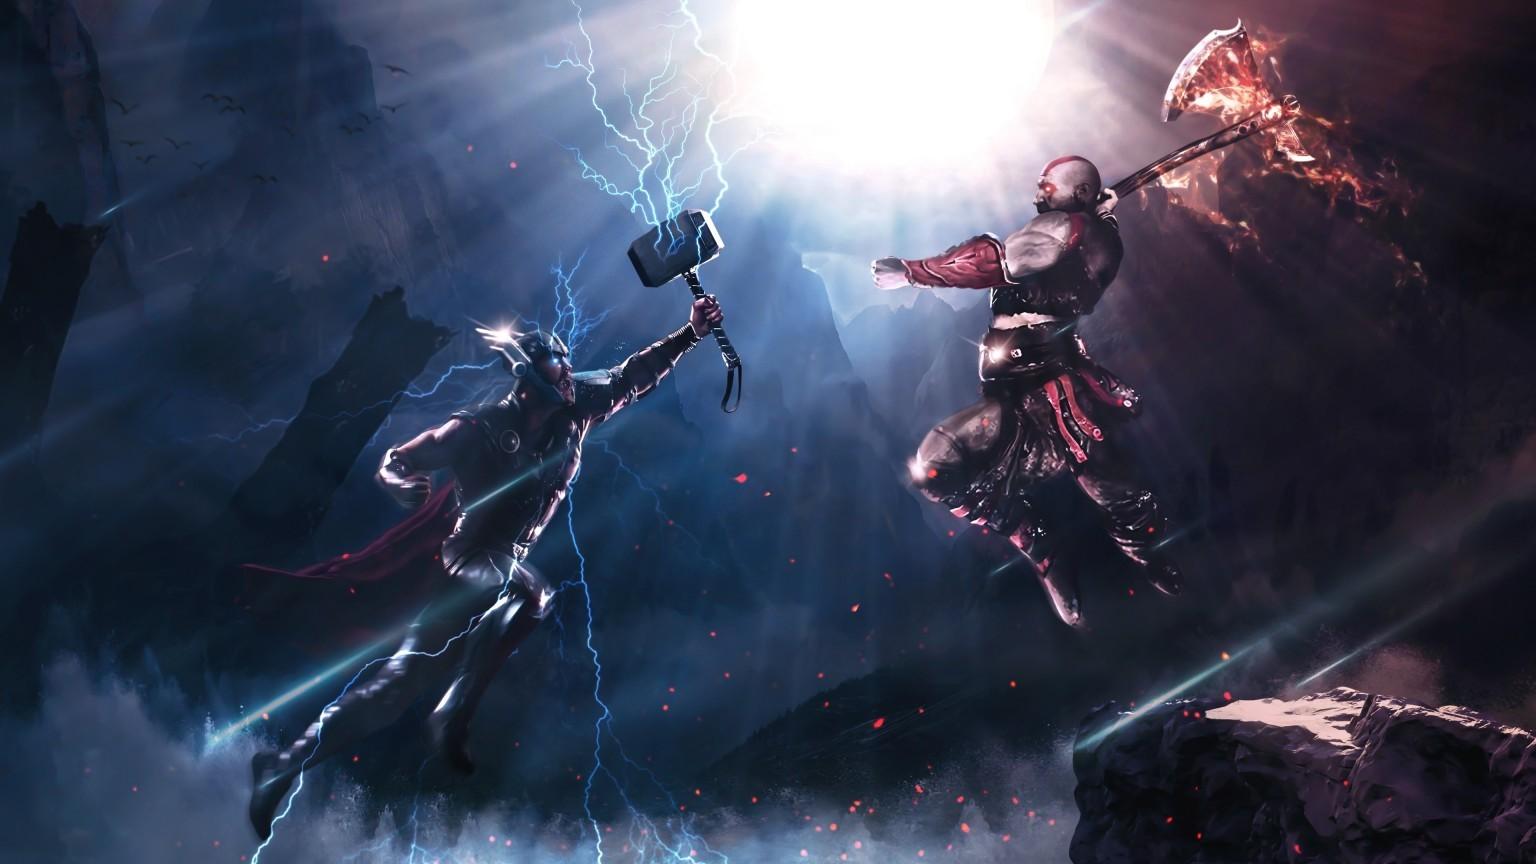 Download 1536x864 Kratos Vs Thor, Fight, Crossover, Lightning, Axe